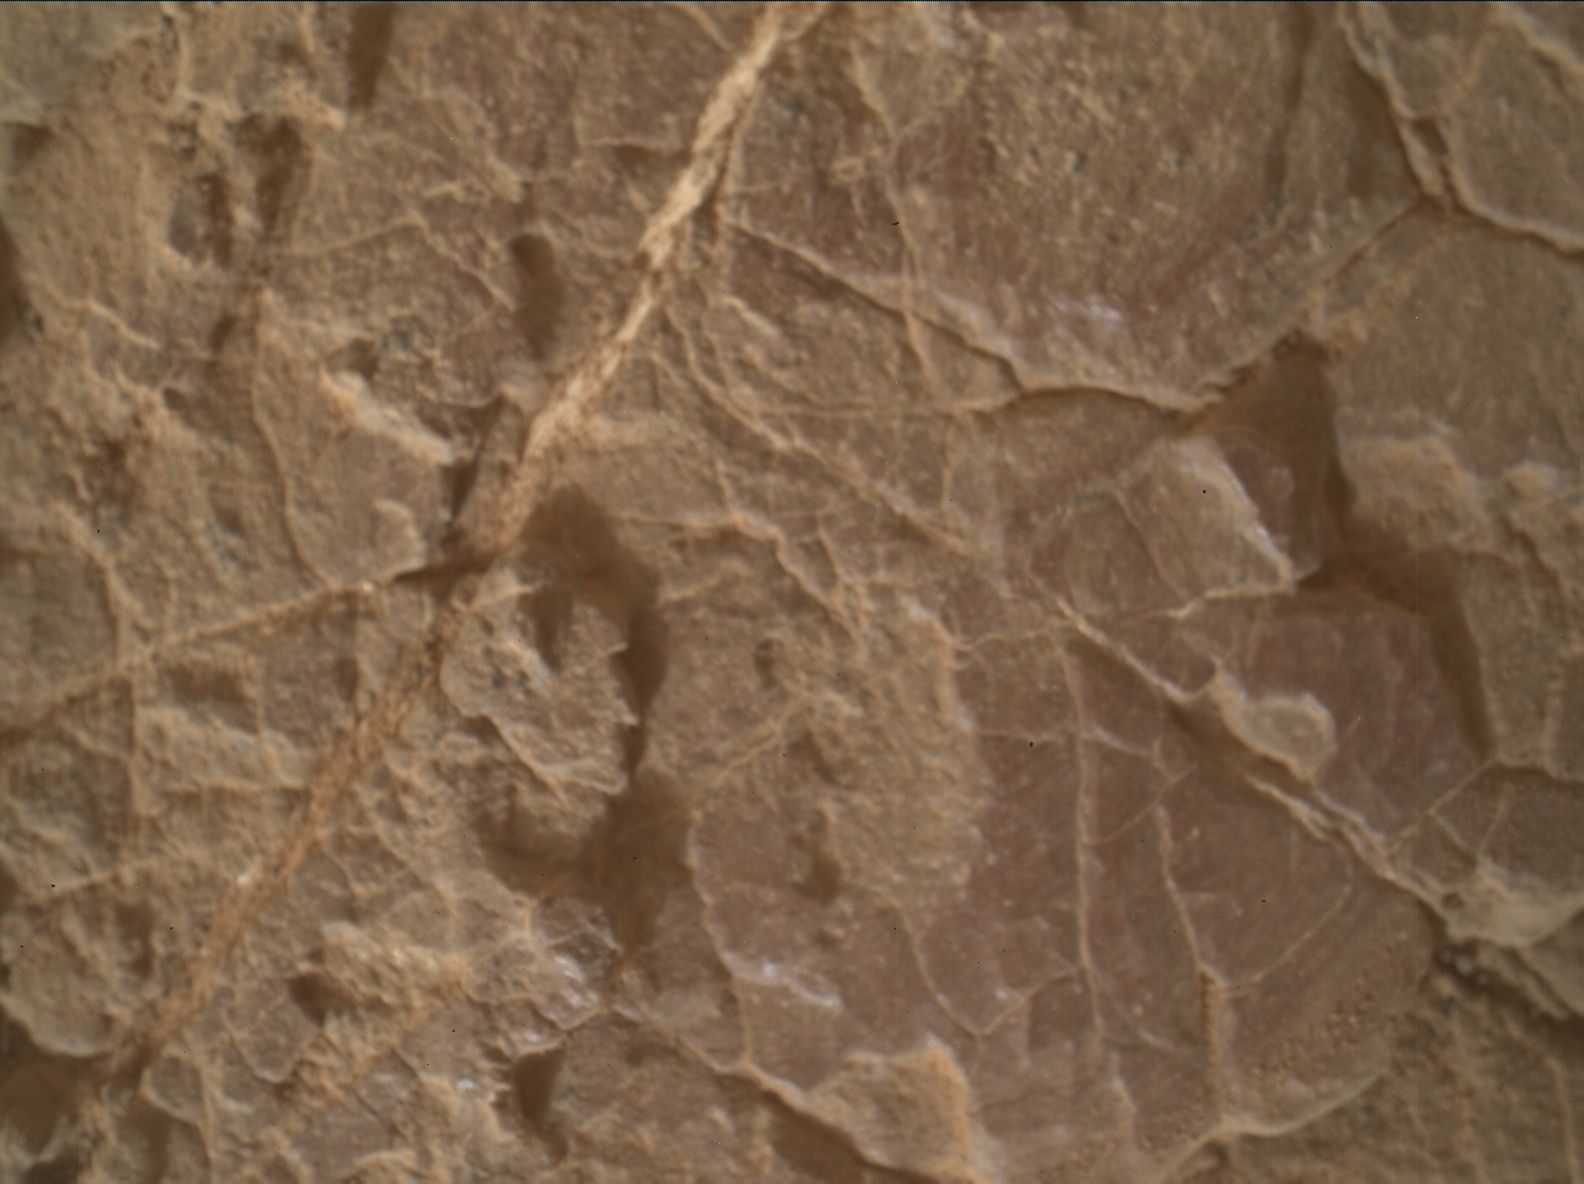 Nasa's Mars rover Curiosity acquired this image using its Mars Hand Lens Imager (MAHLI) on Sol 2318